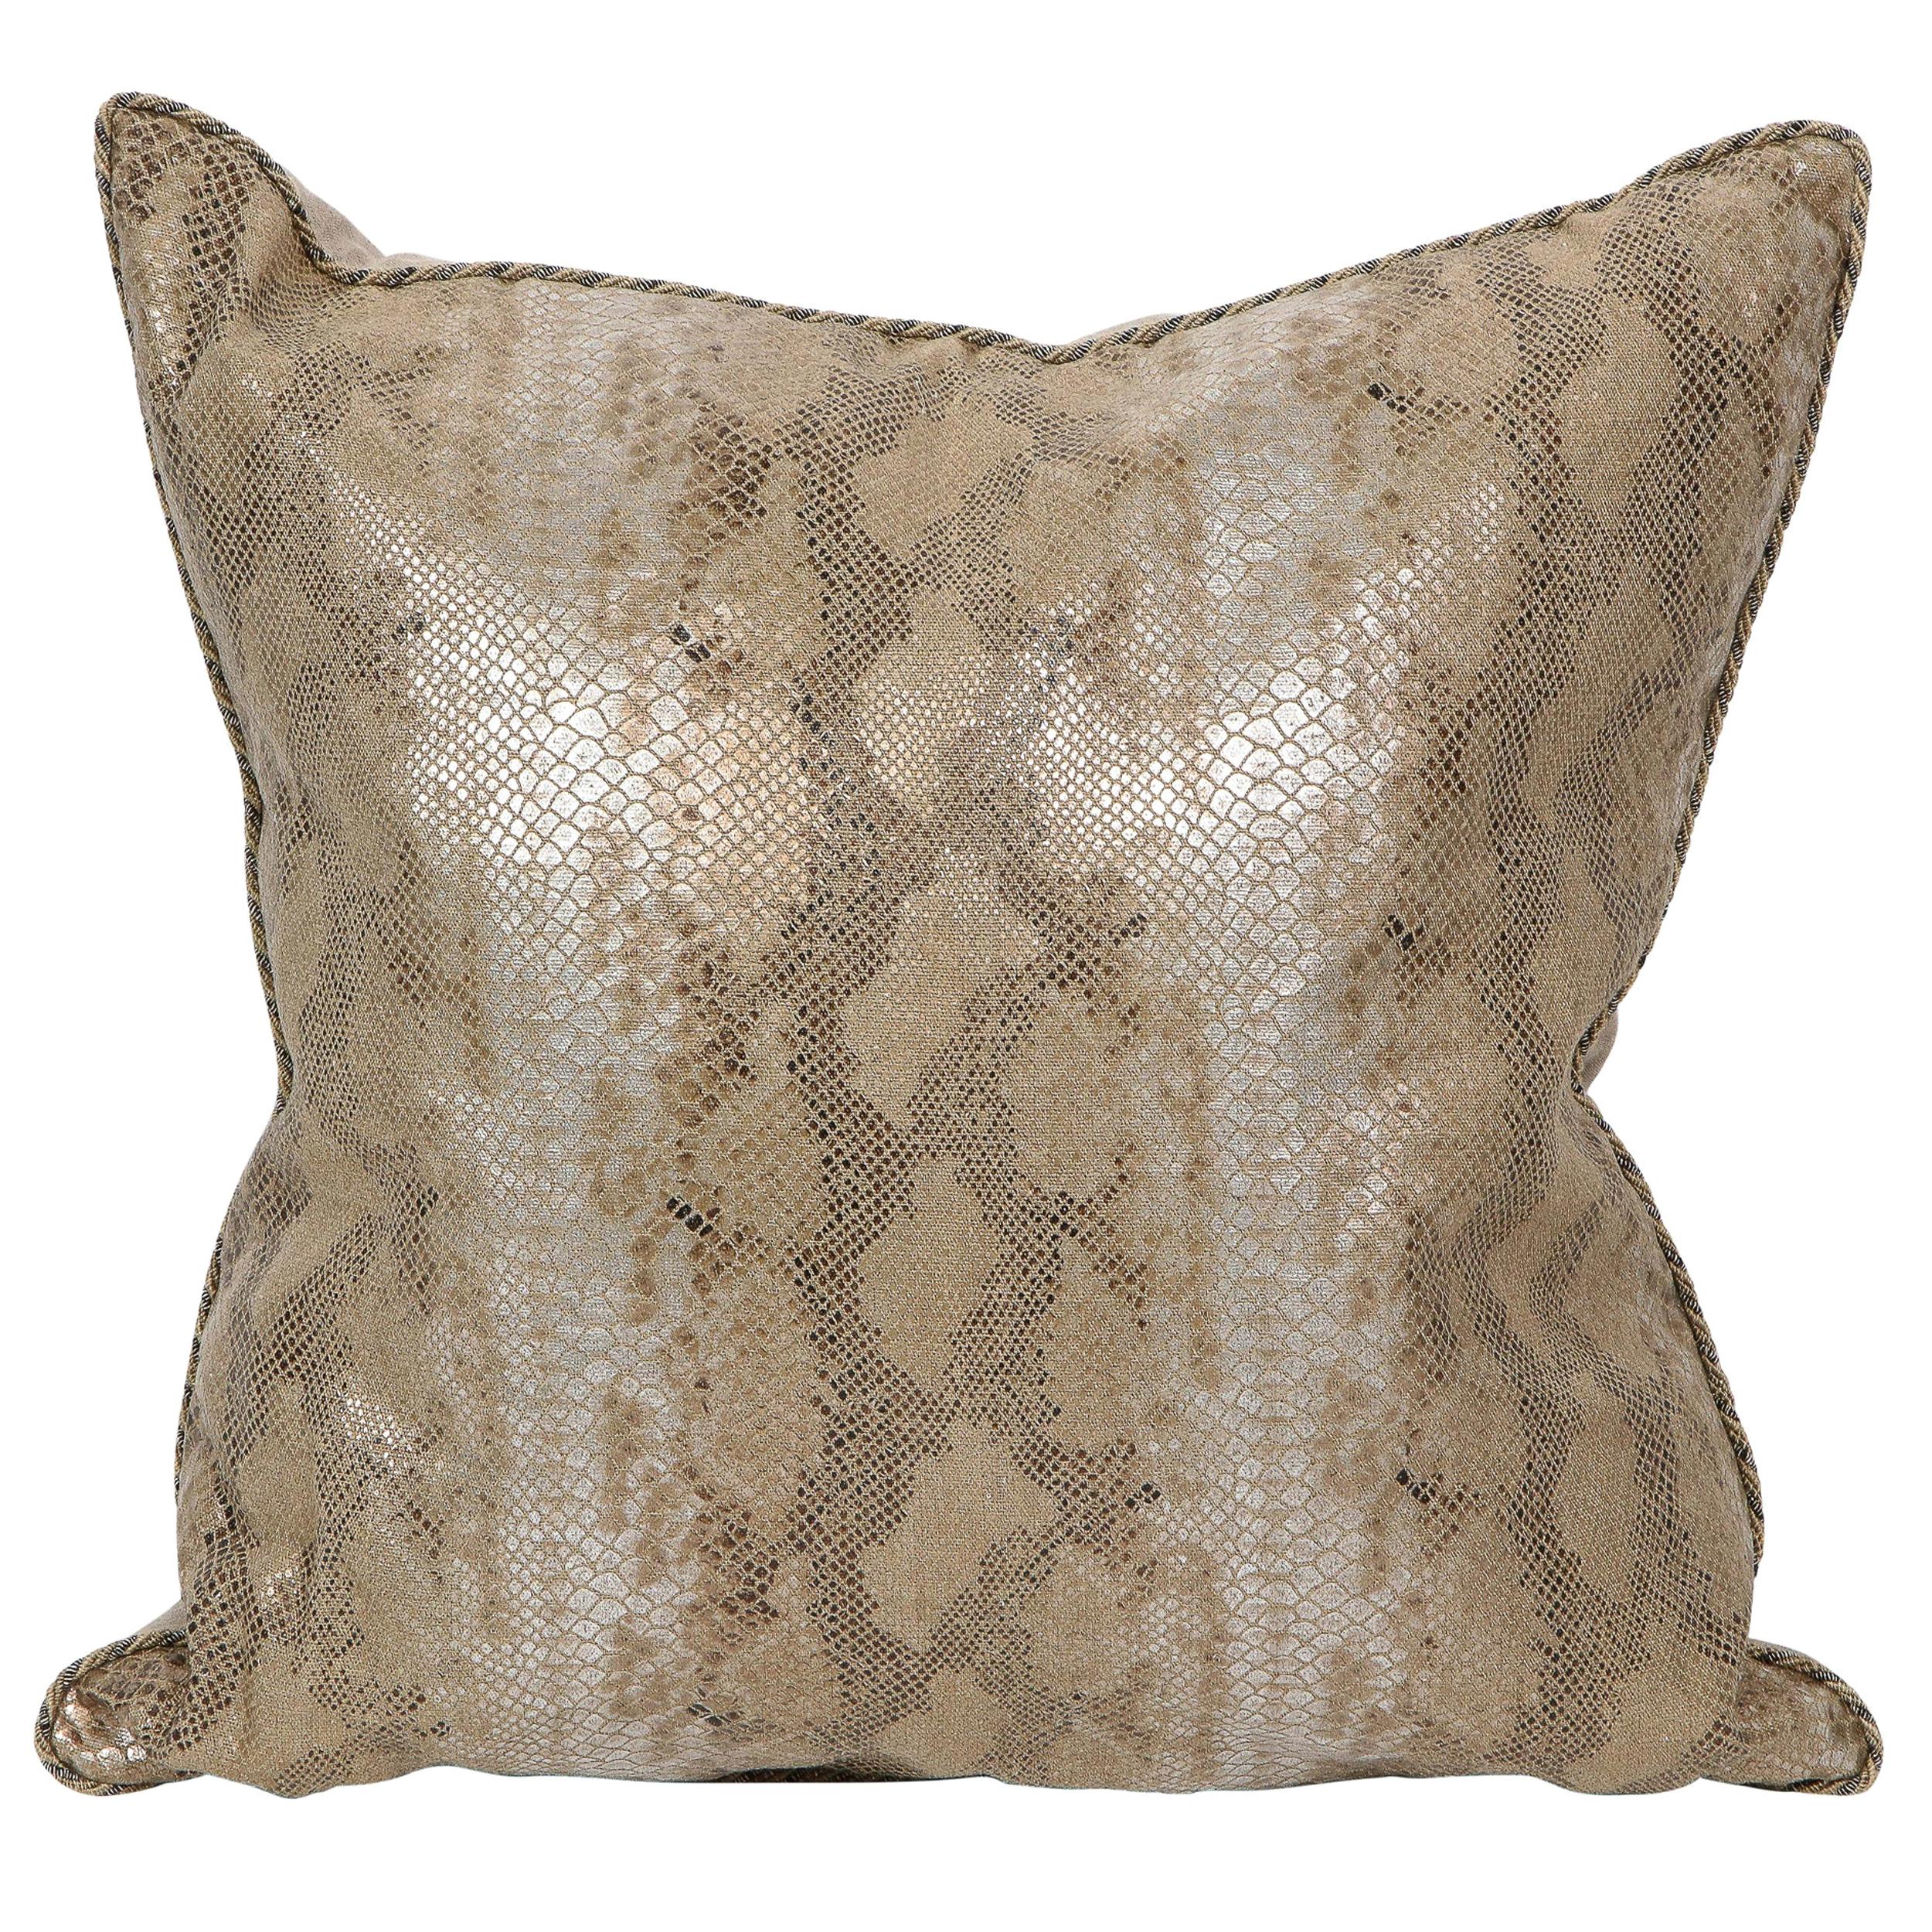 Modernist Iridescent Tan and Metallic Python Pattern Pillow with Helix Piping